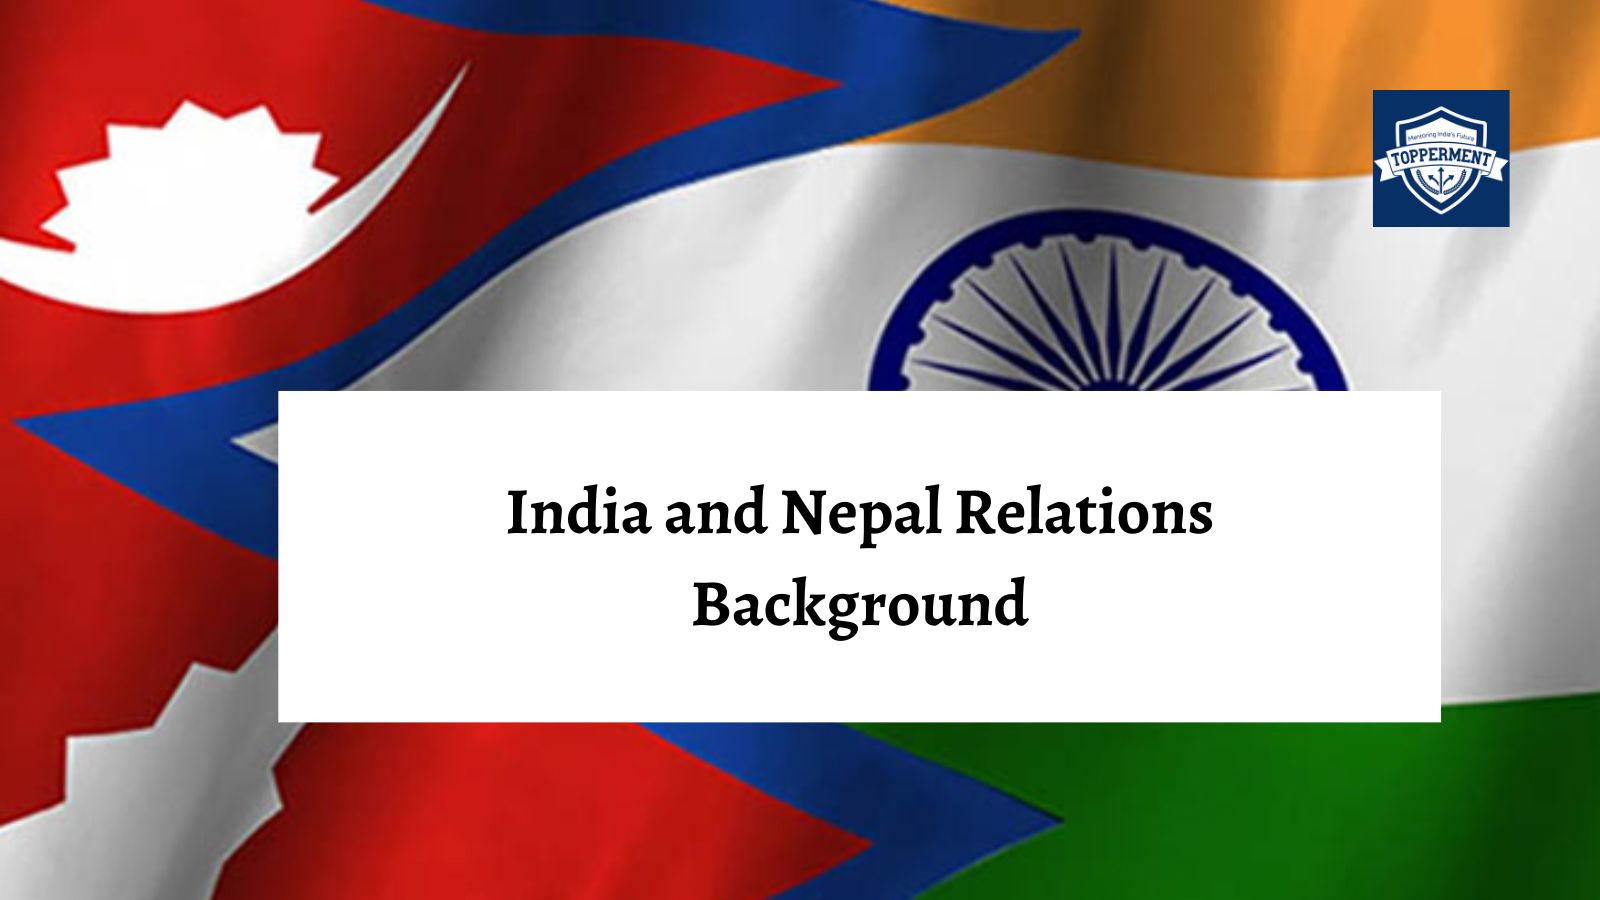 India and Nepal A Close Neighborly Relationship | Best UPSC IAS Coaching For Mentorship And Guidance